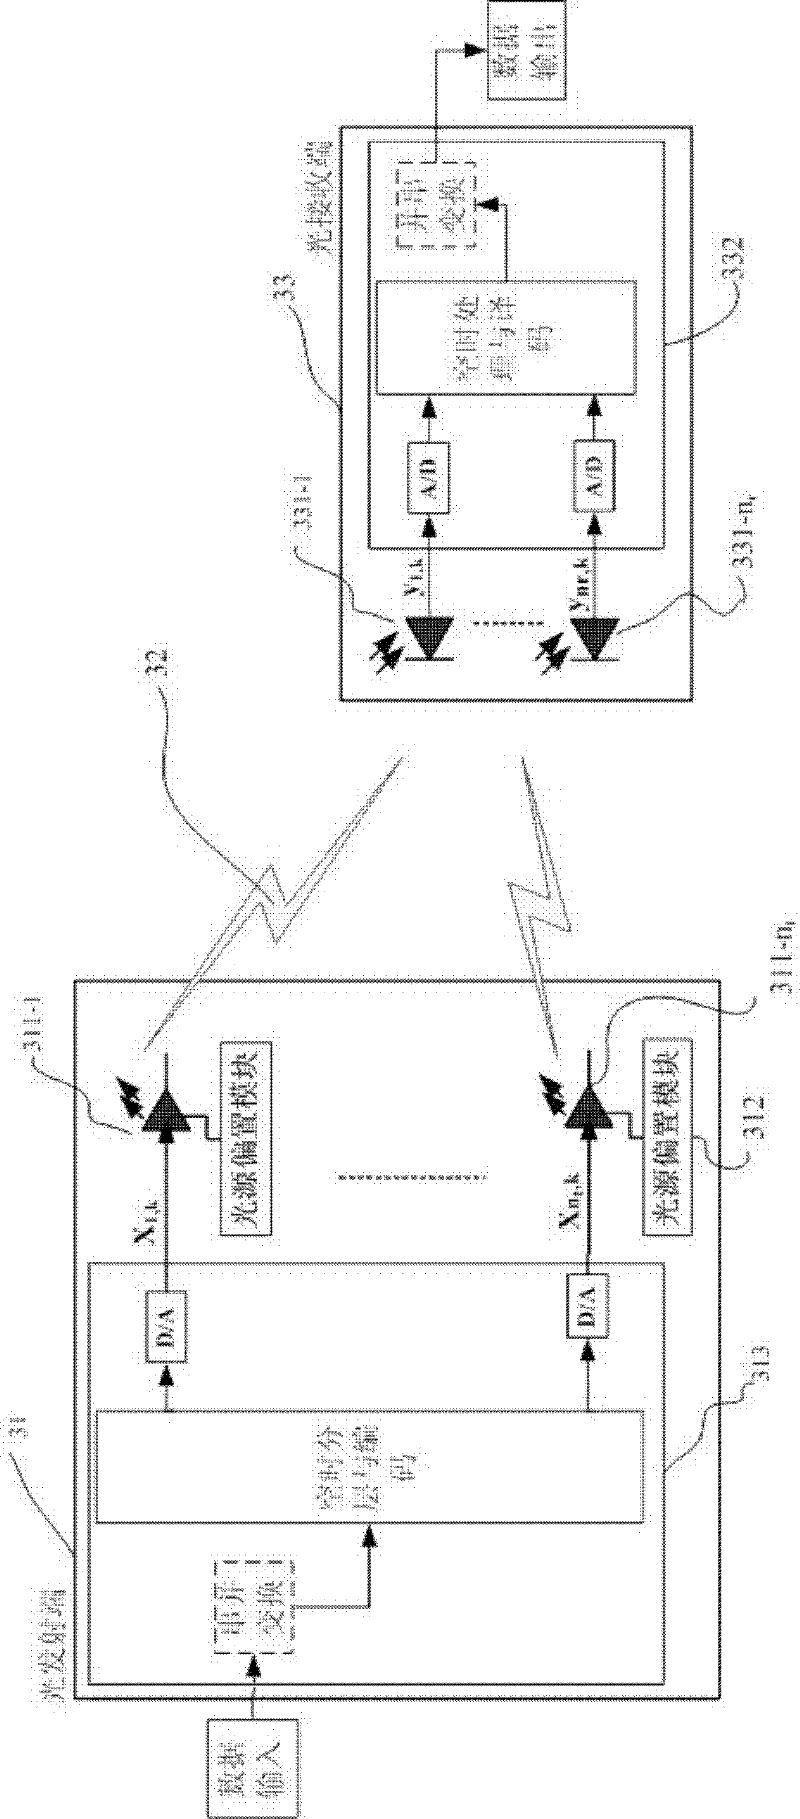 Multi-input and multi-output optical communication system and method